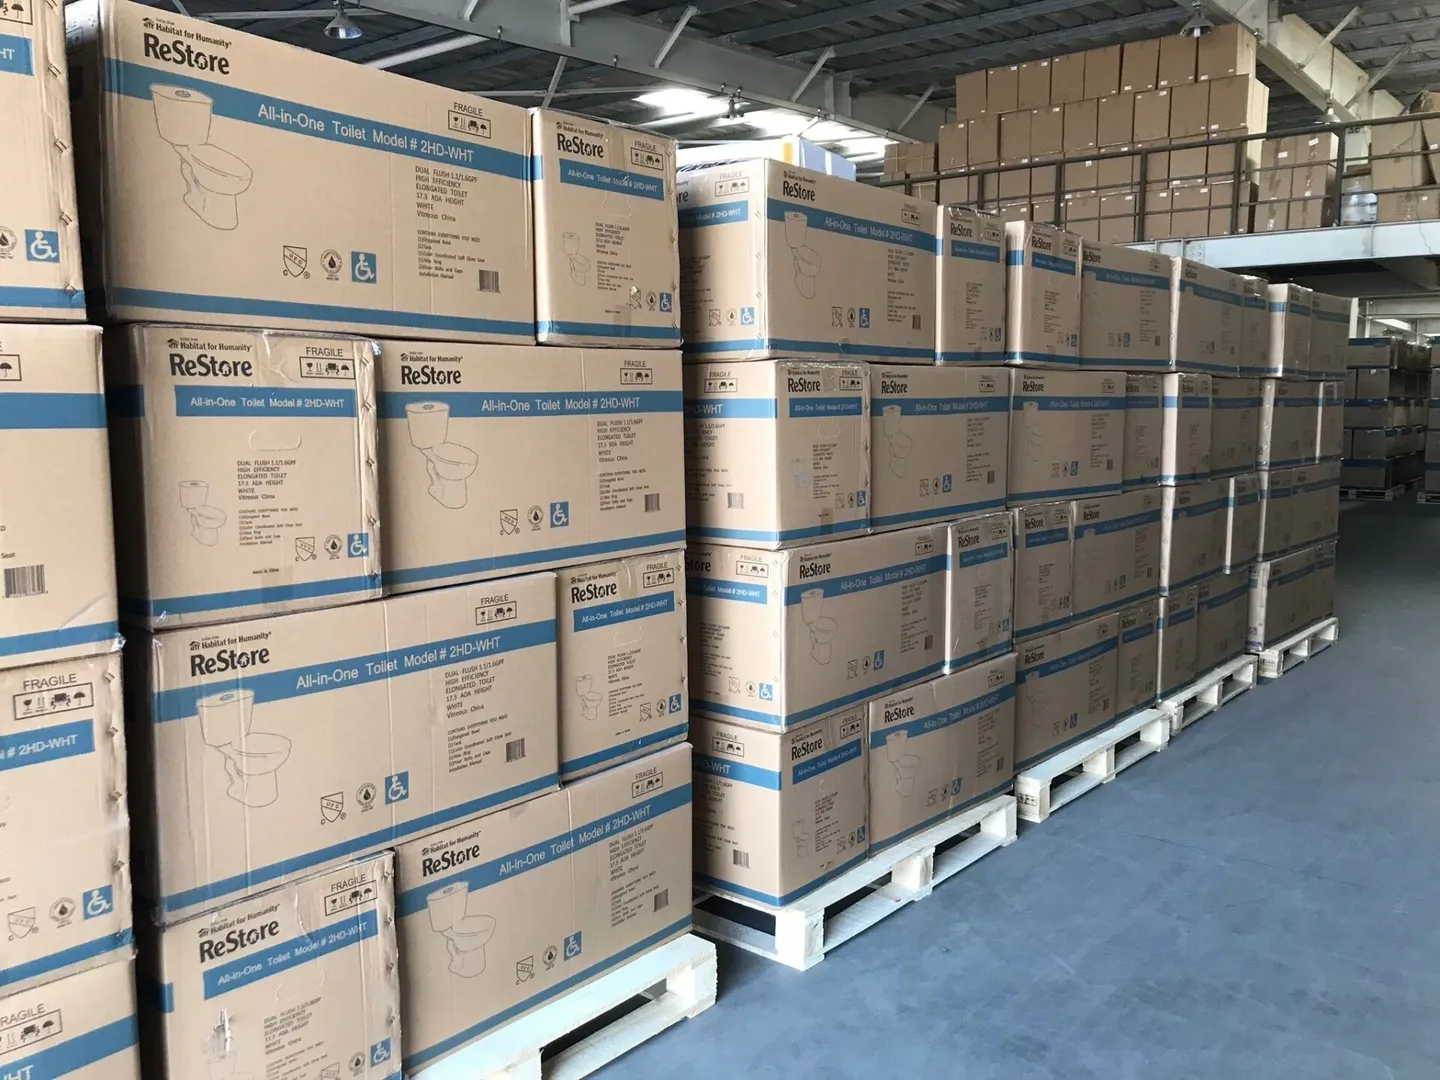 Warehouse stocked with Re-Store All-in-One Toilet Model units